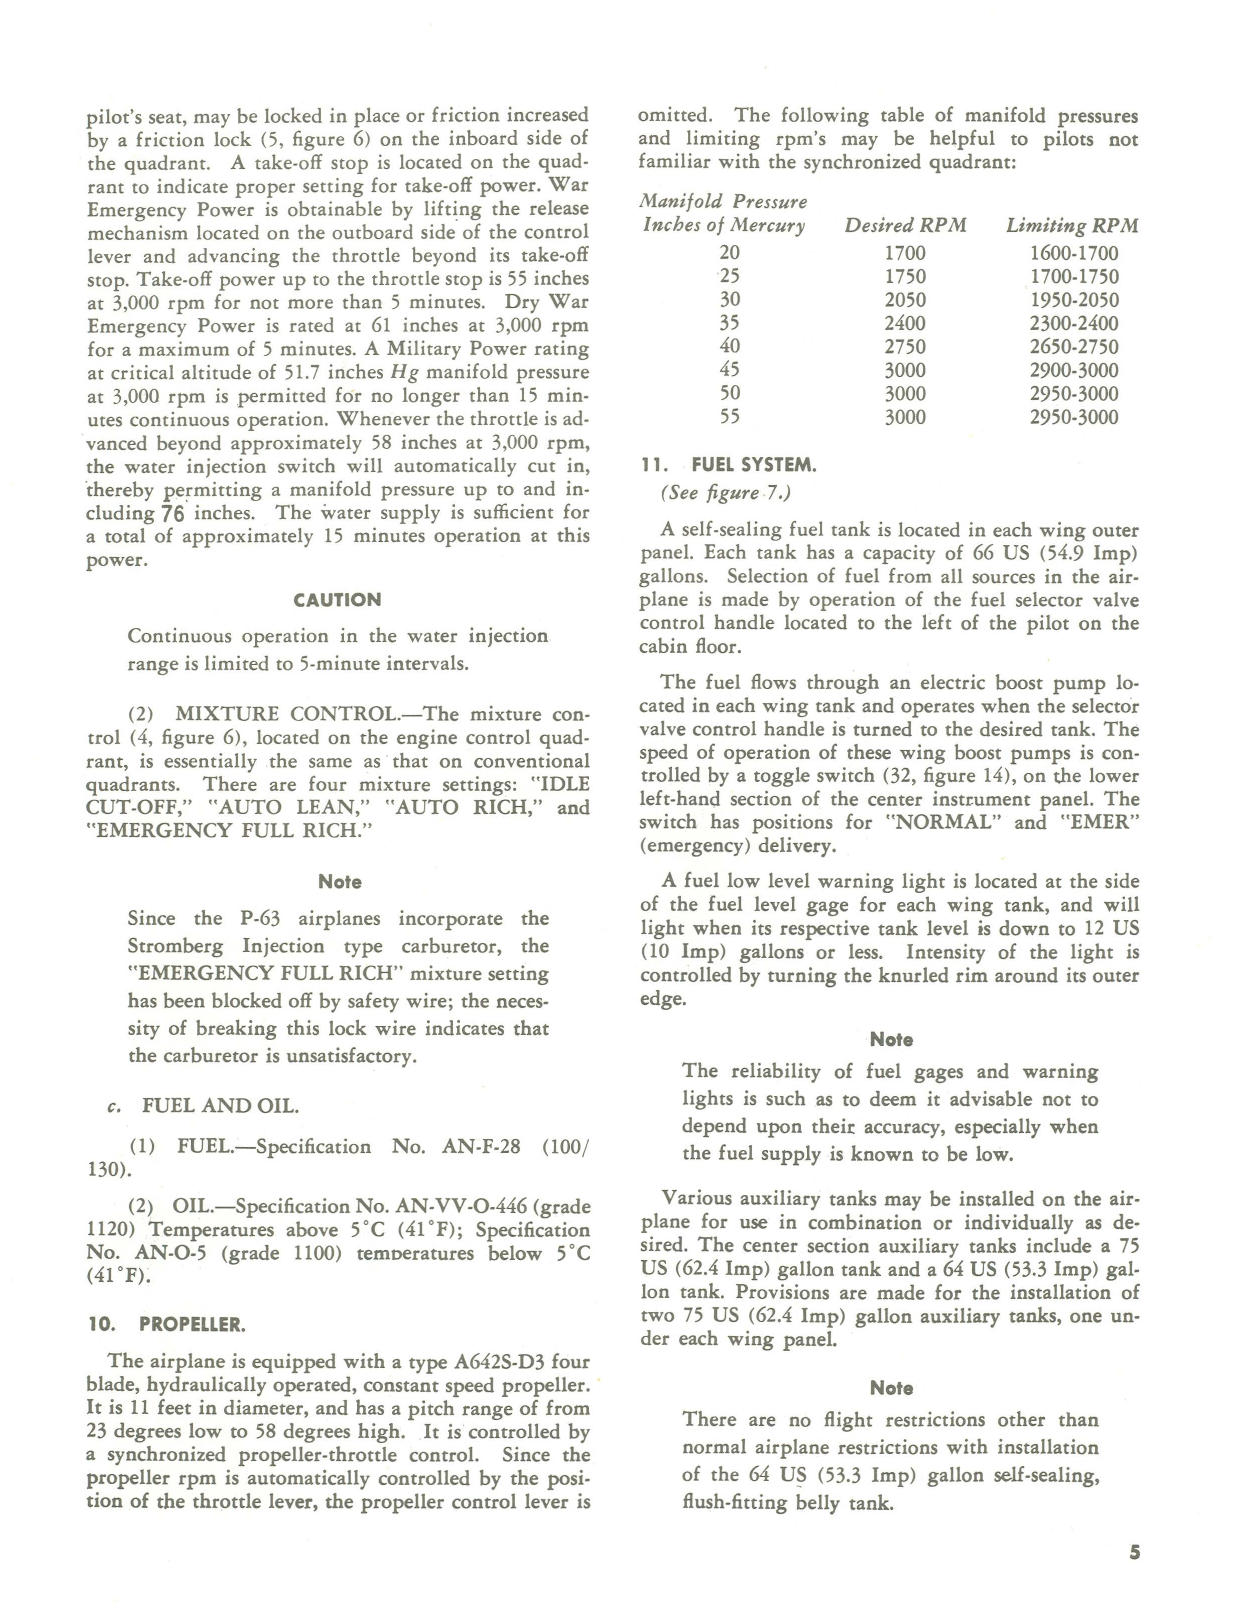 Sample page 9 from AirCorps Library document: Pilot's Flight Operating Instructions for P-63C